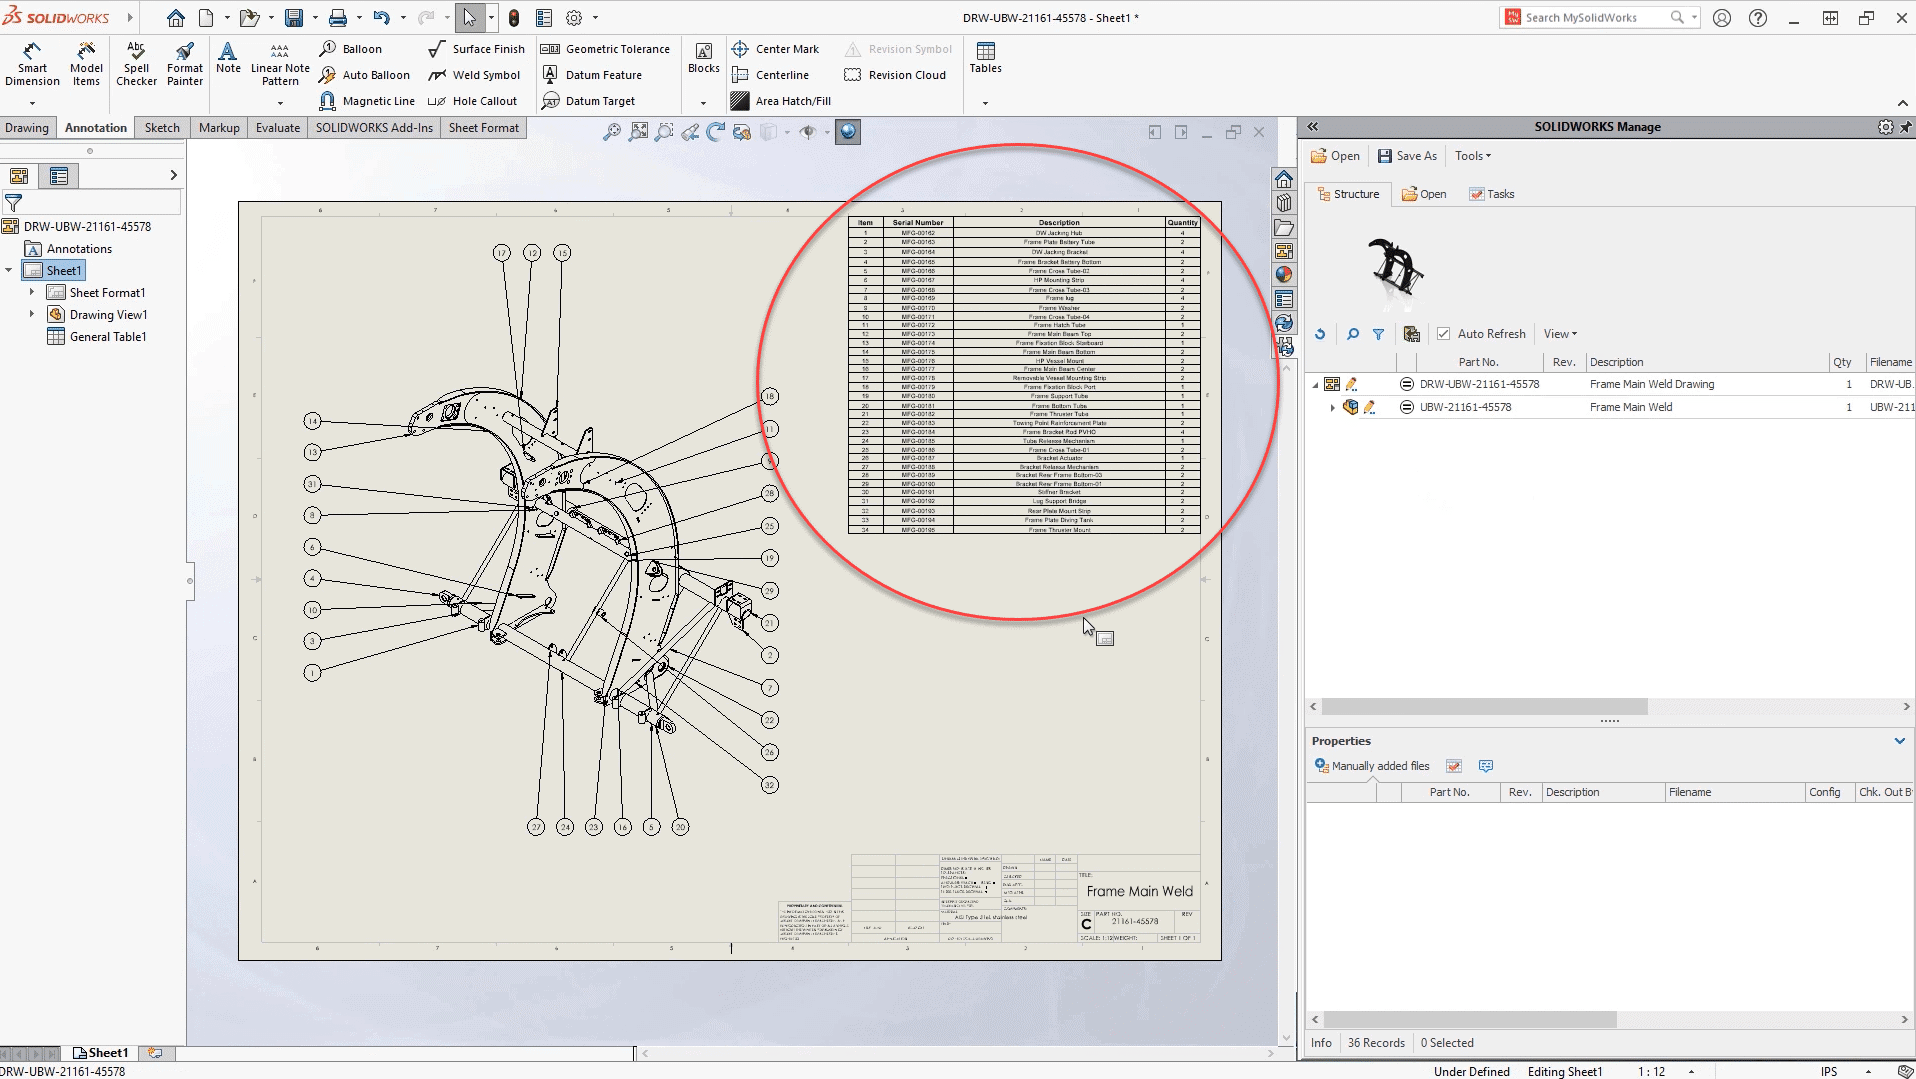 Now you can add BOMs generated in SOLIDWORKS Manage 2022 directly to CAD drawings.